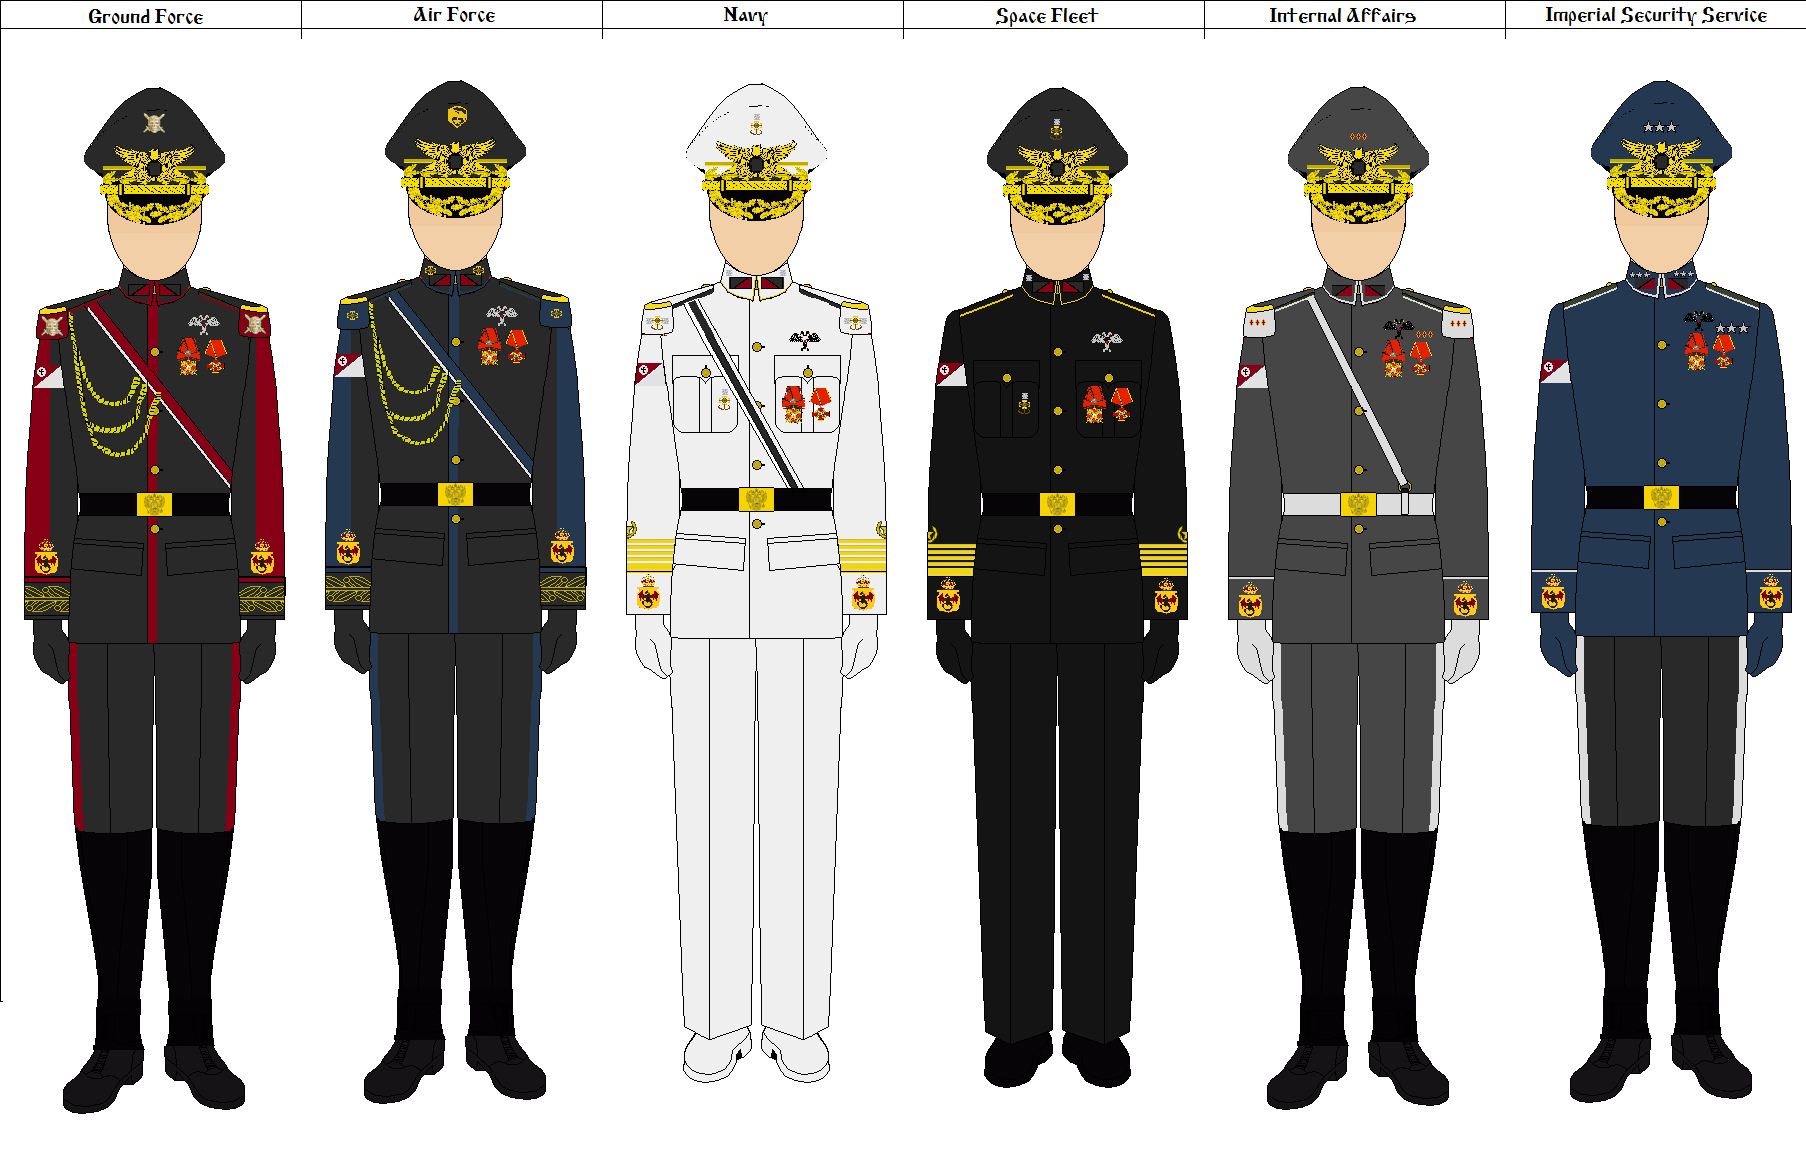 NationStates | Dispatch | Updated Military Uniforms (ALL BRANCHES)1806 x 1172